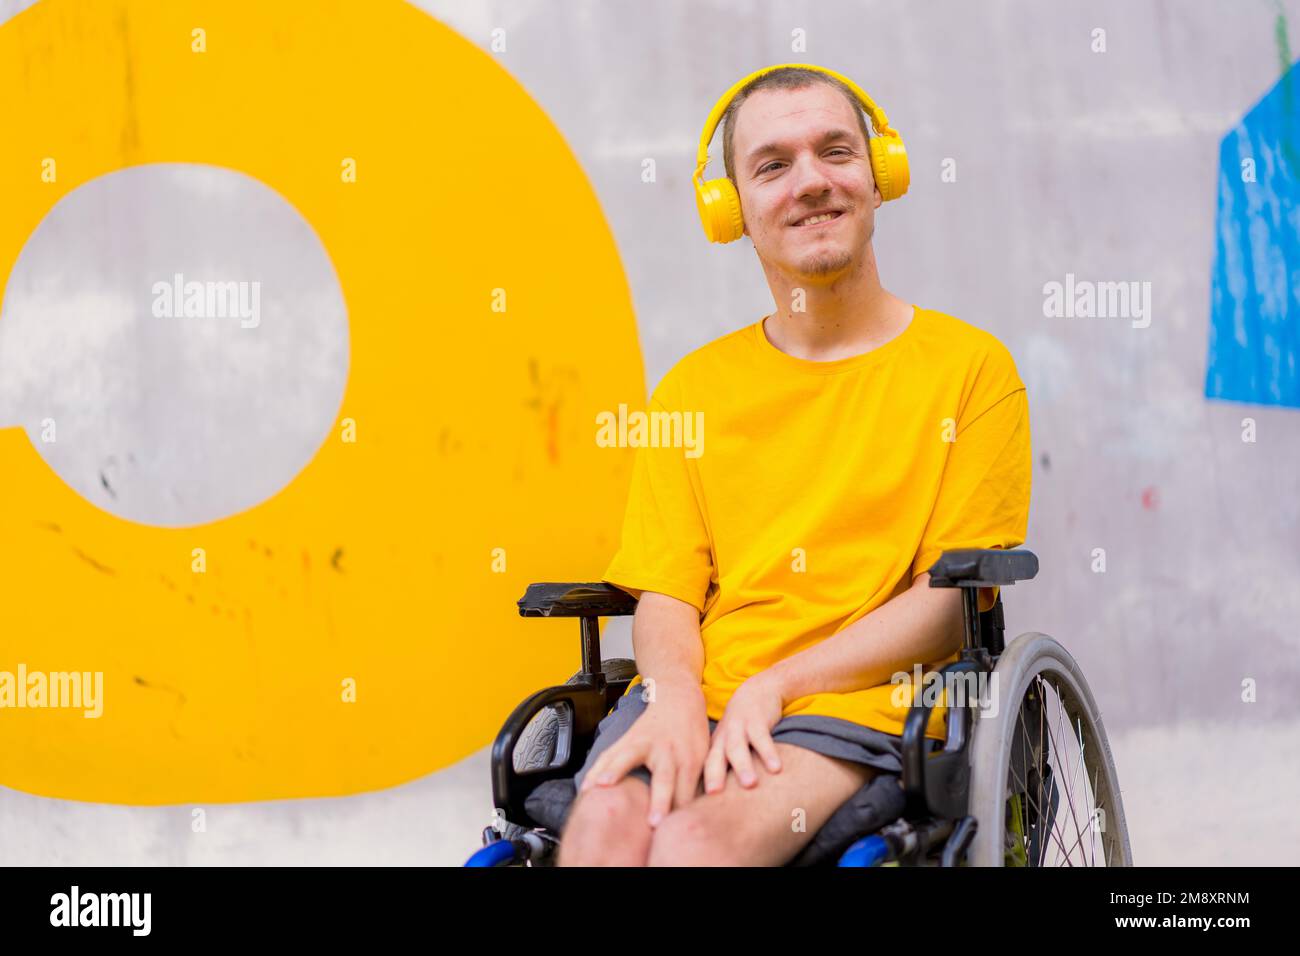 Disabled person in wheelchair listening to music, smiling Stock Photo